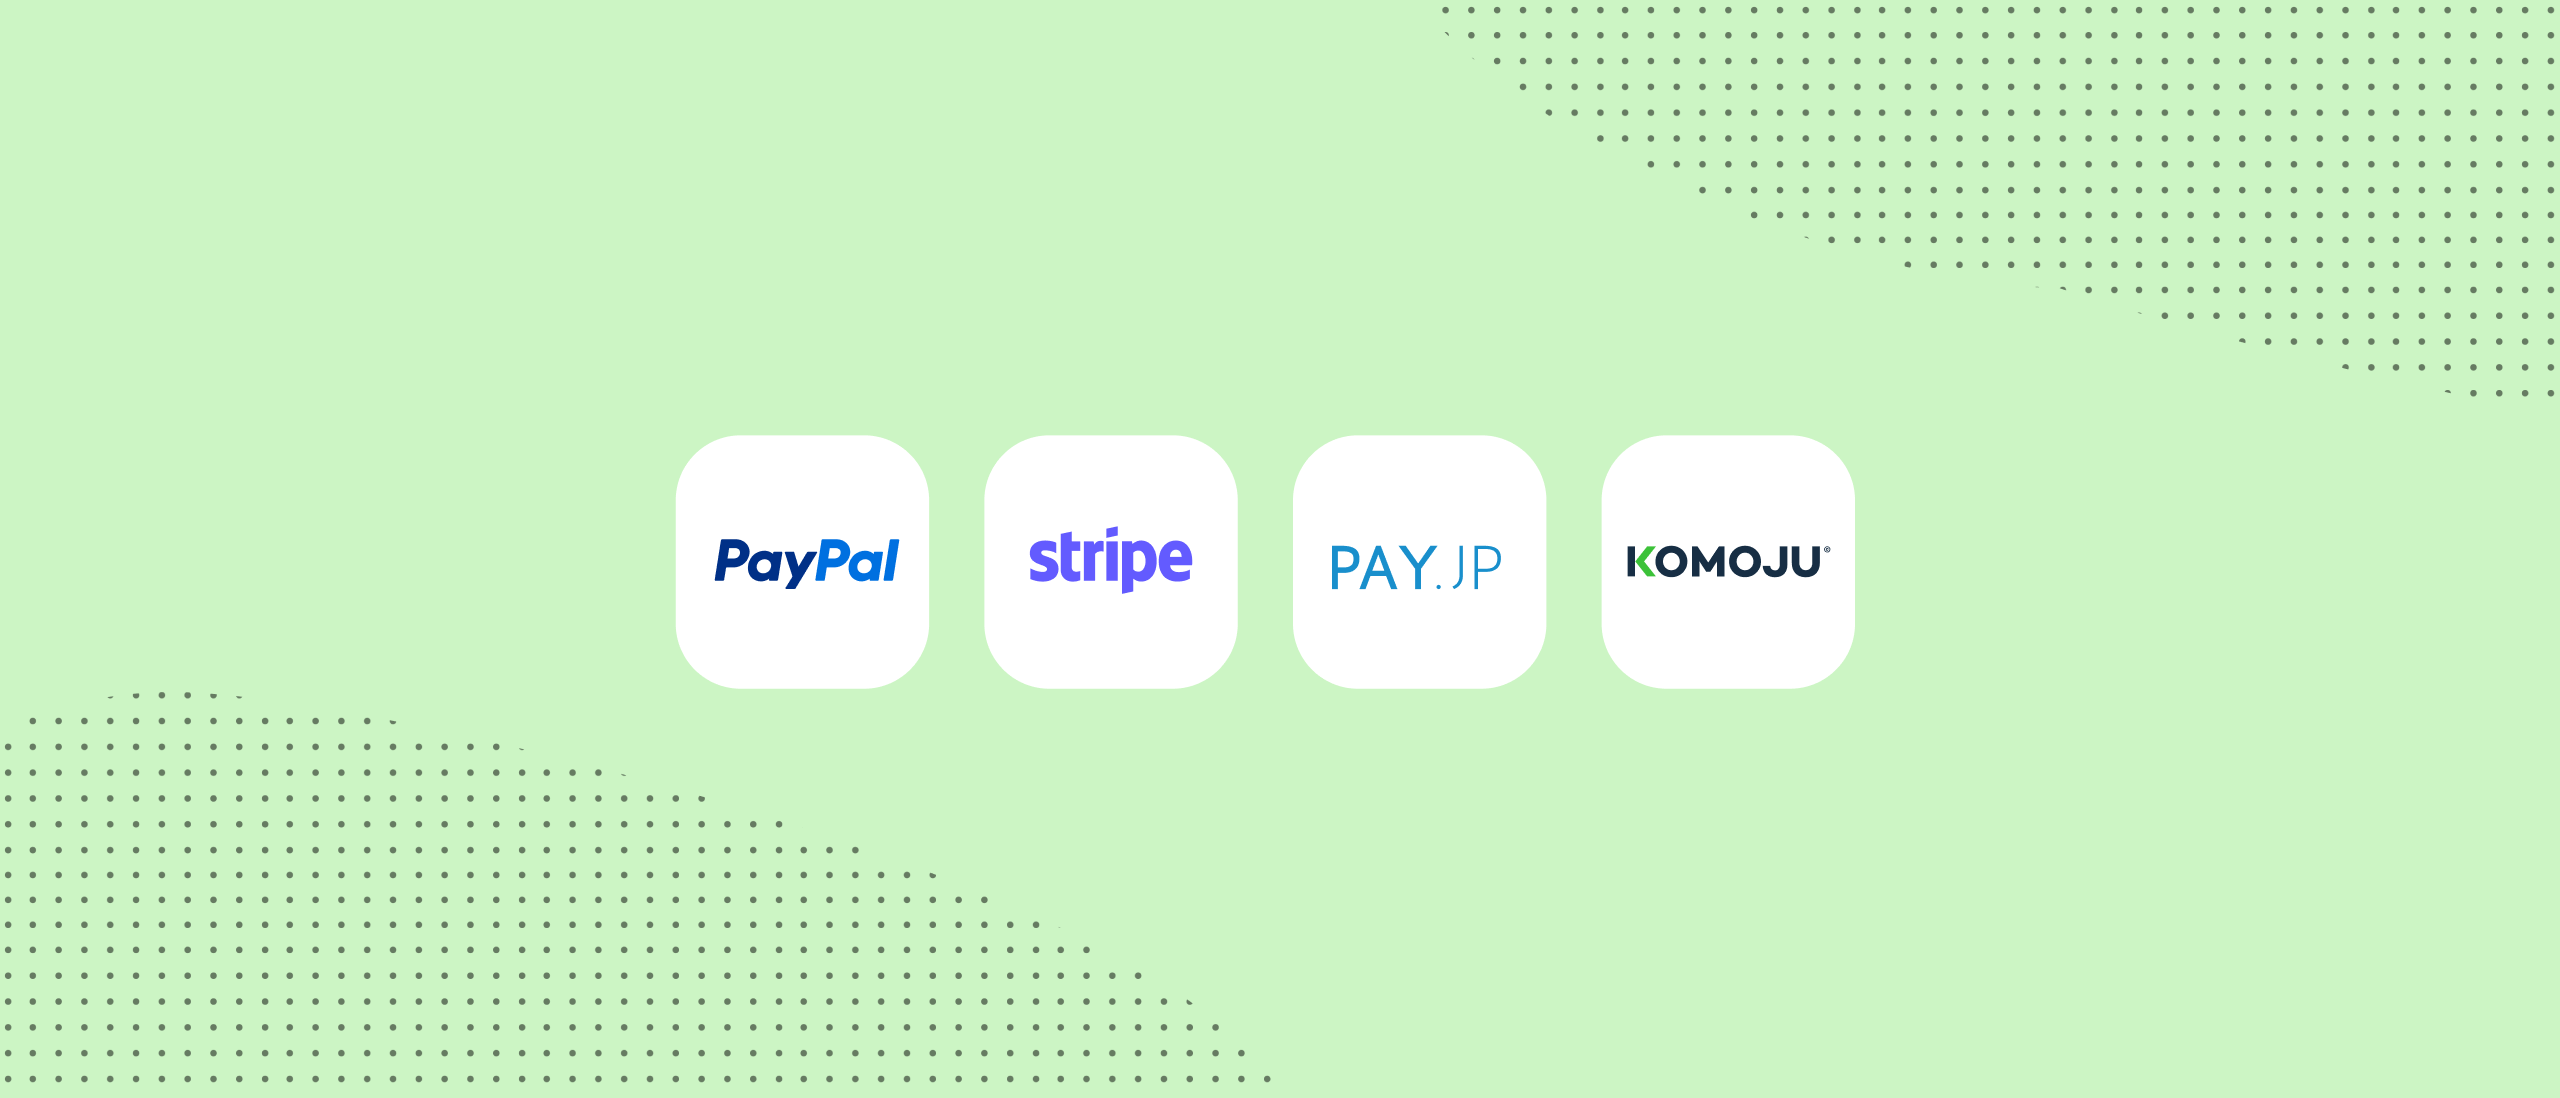 4 ways to take online payments in Japan